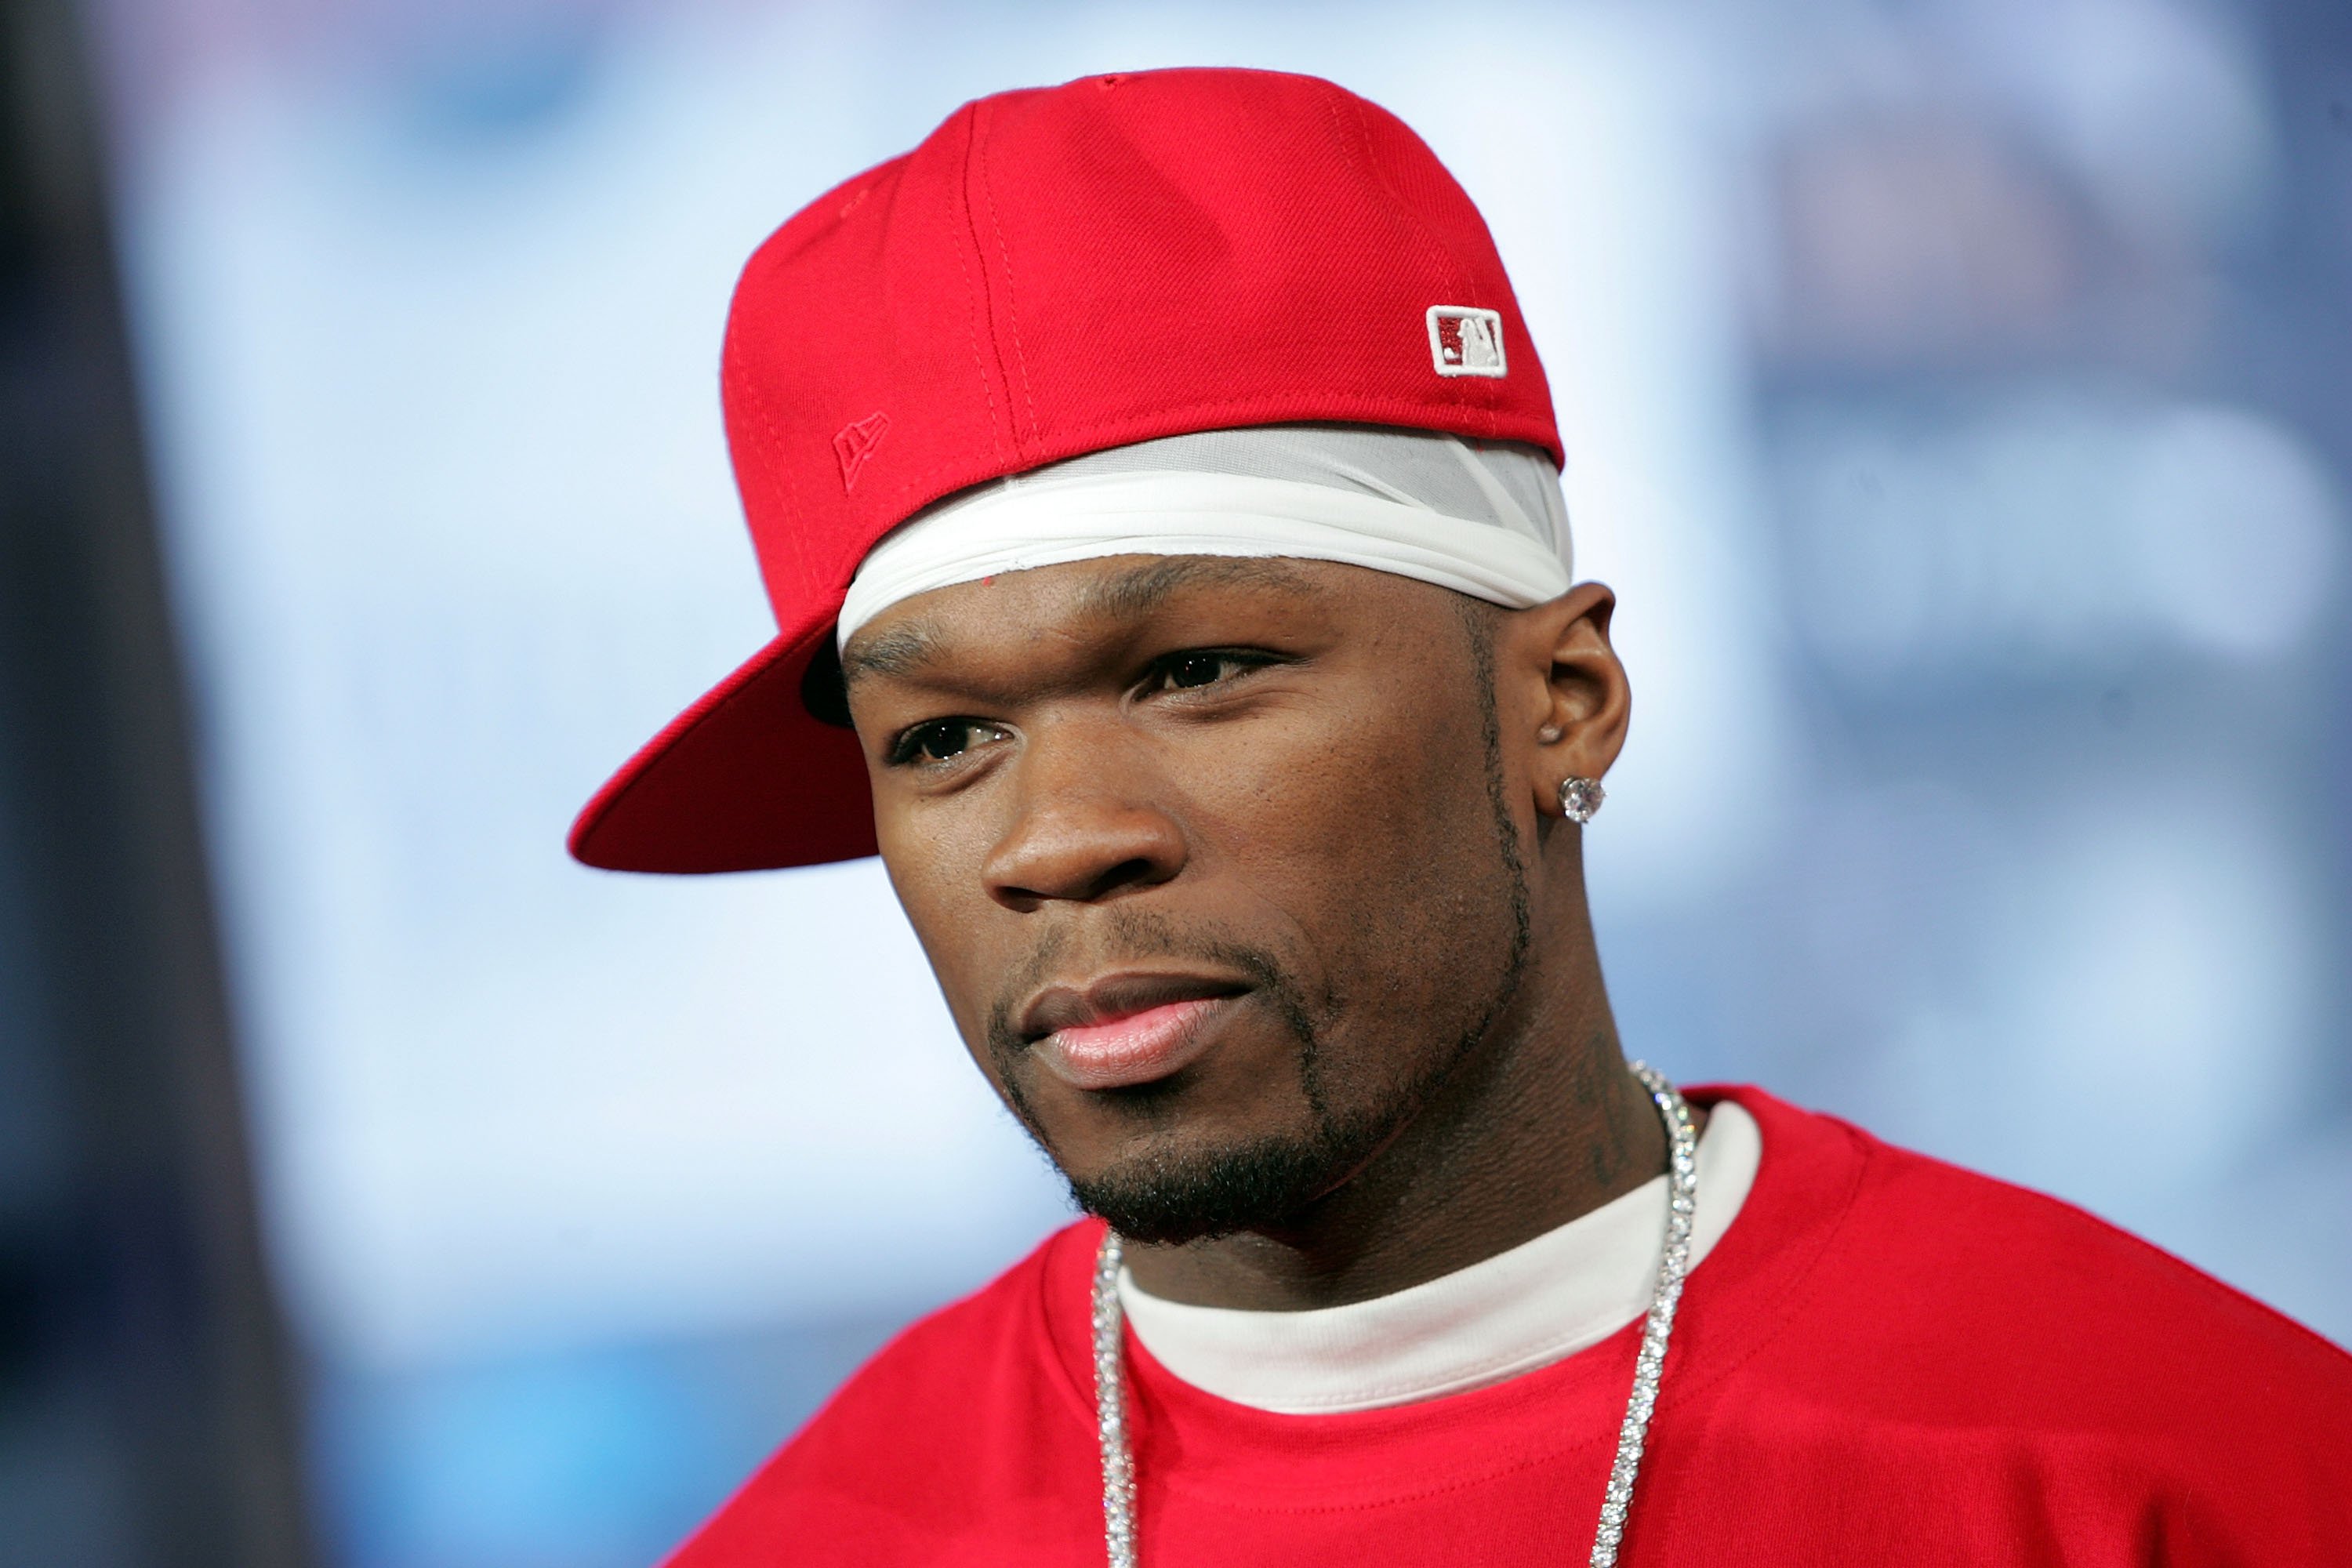 50 Cent wearing a hat